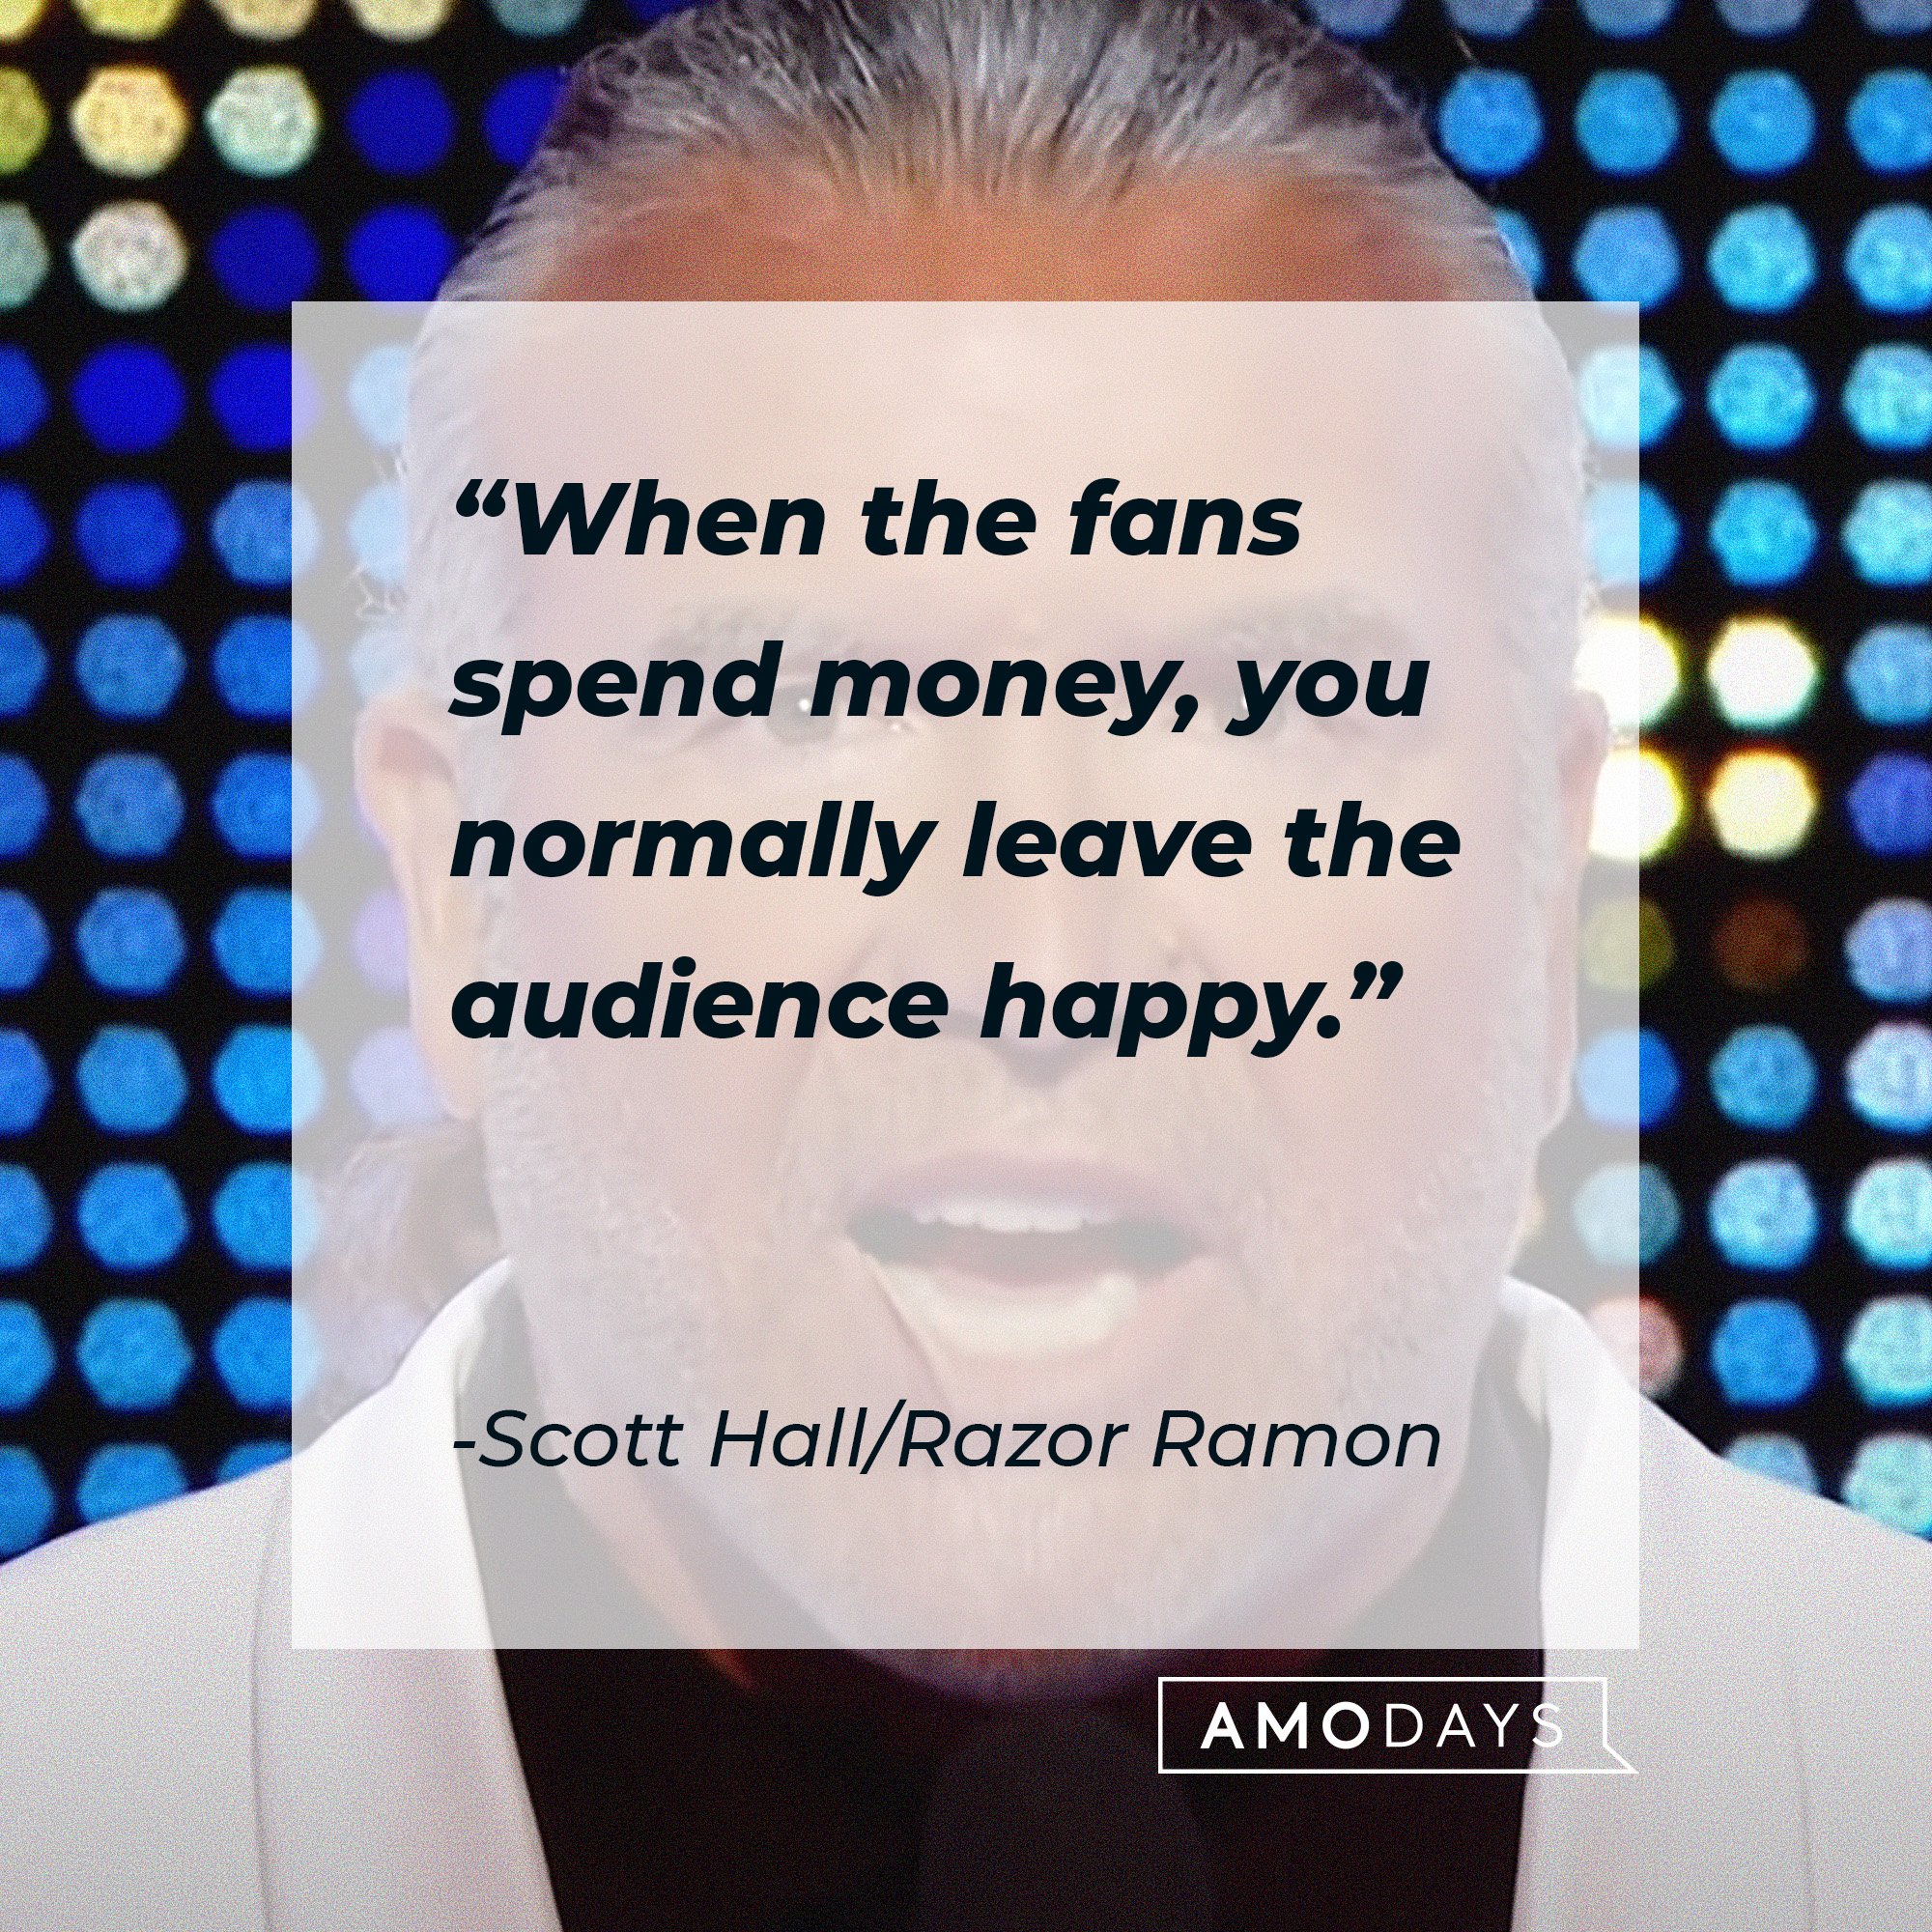 Scott Hall/Razor Ramon’s quote: “When the fans spend money, you normally leave the audience happy.” | Image: AmoDays